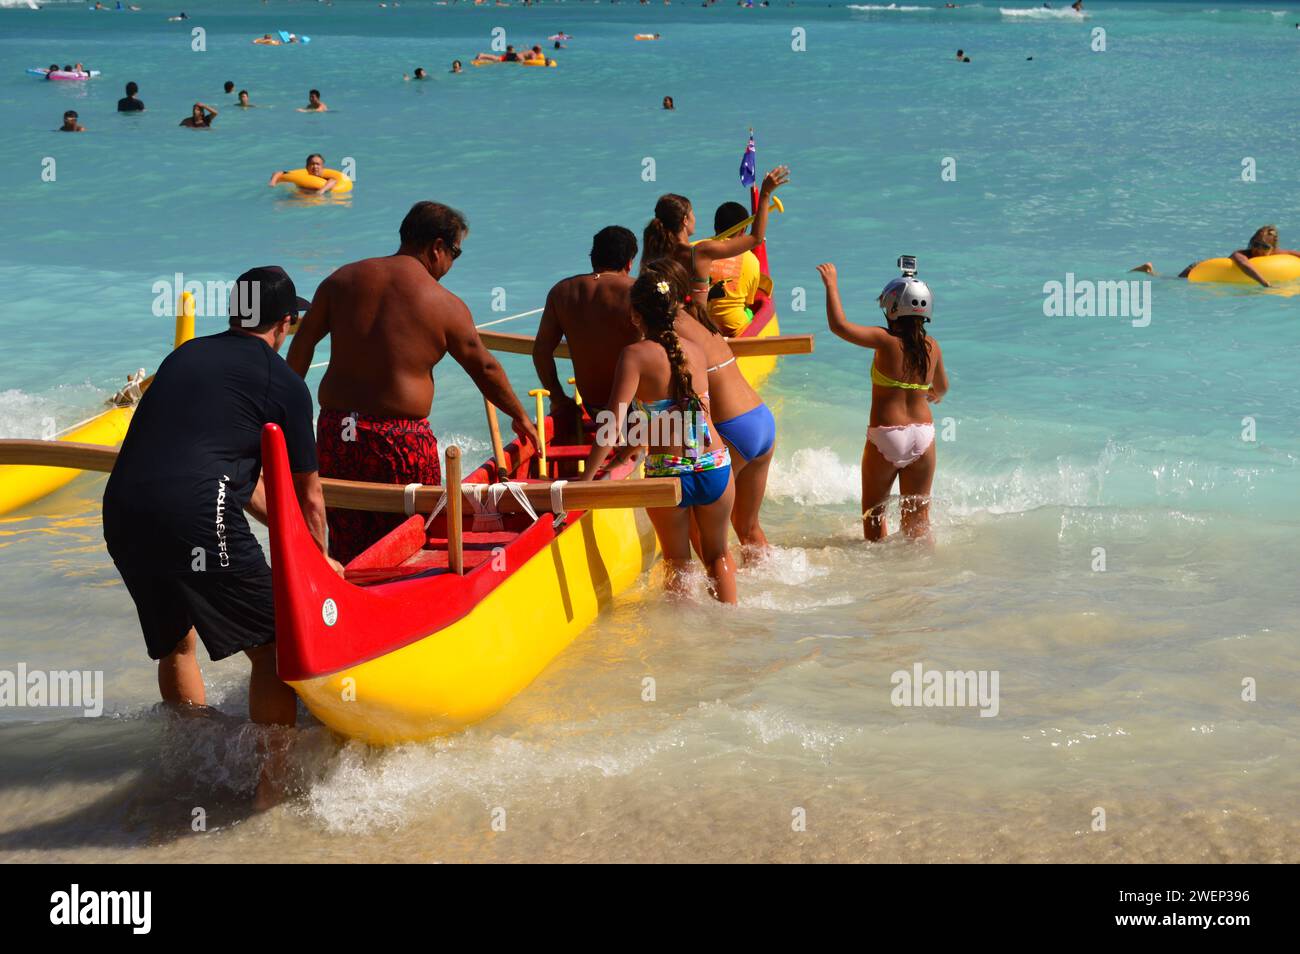 Waikiki Beach, HI, USA July 31, 2014 A team pushes an outrigger canoe into the waves of the Pacific Ocean, carrying tourists and adventurers on Waikik Stock Photo